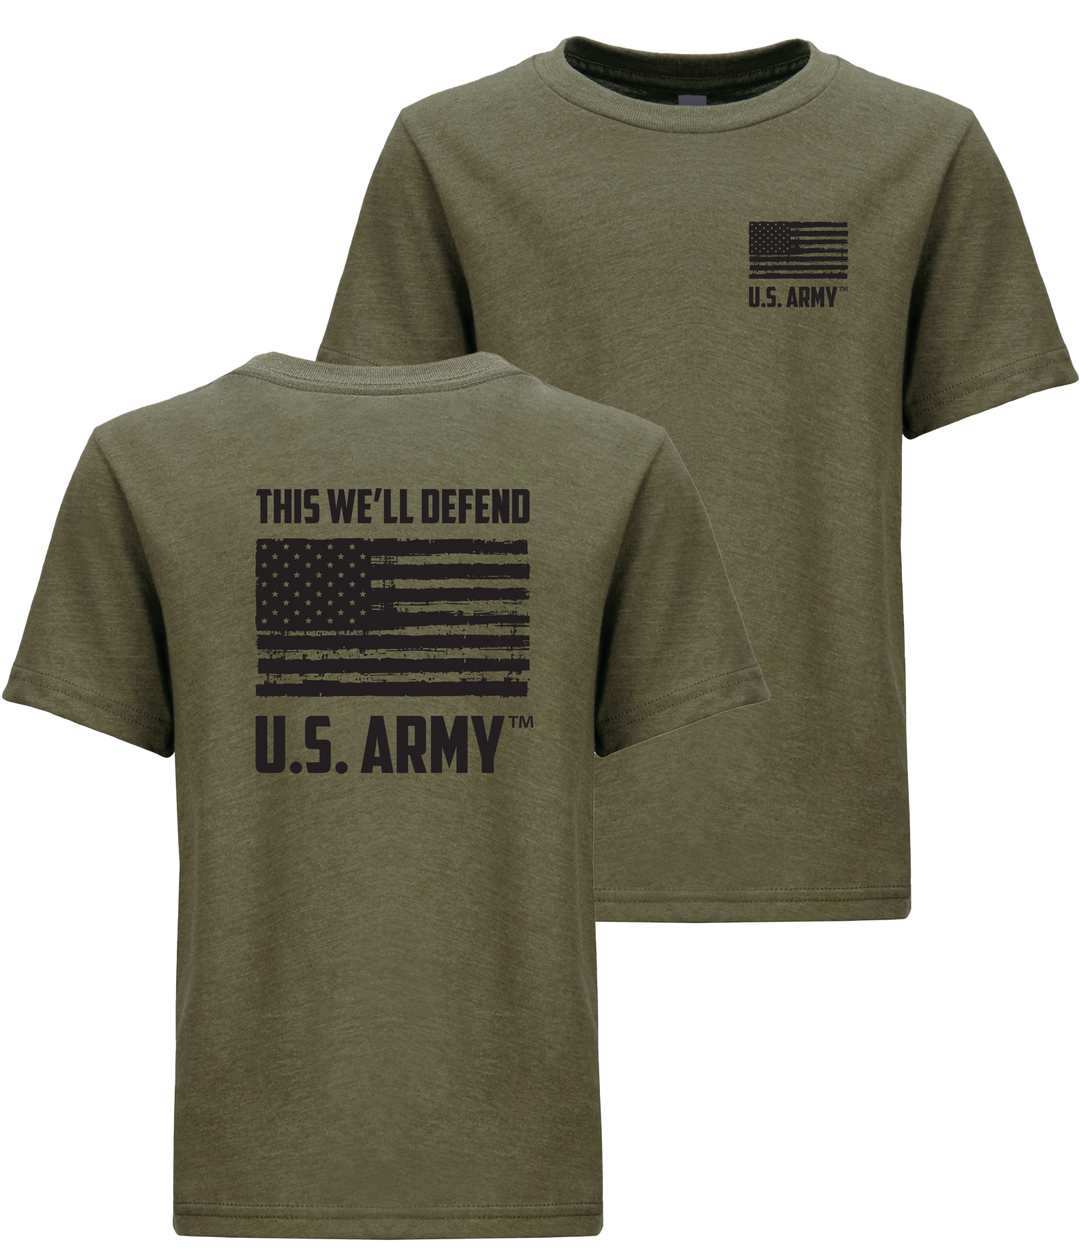 U.S. Army™ This We'll Defend Youth T-Shirt (Military Green)